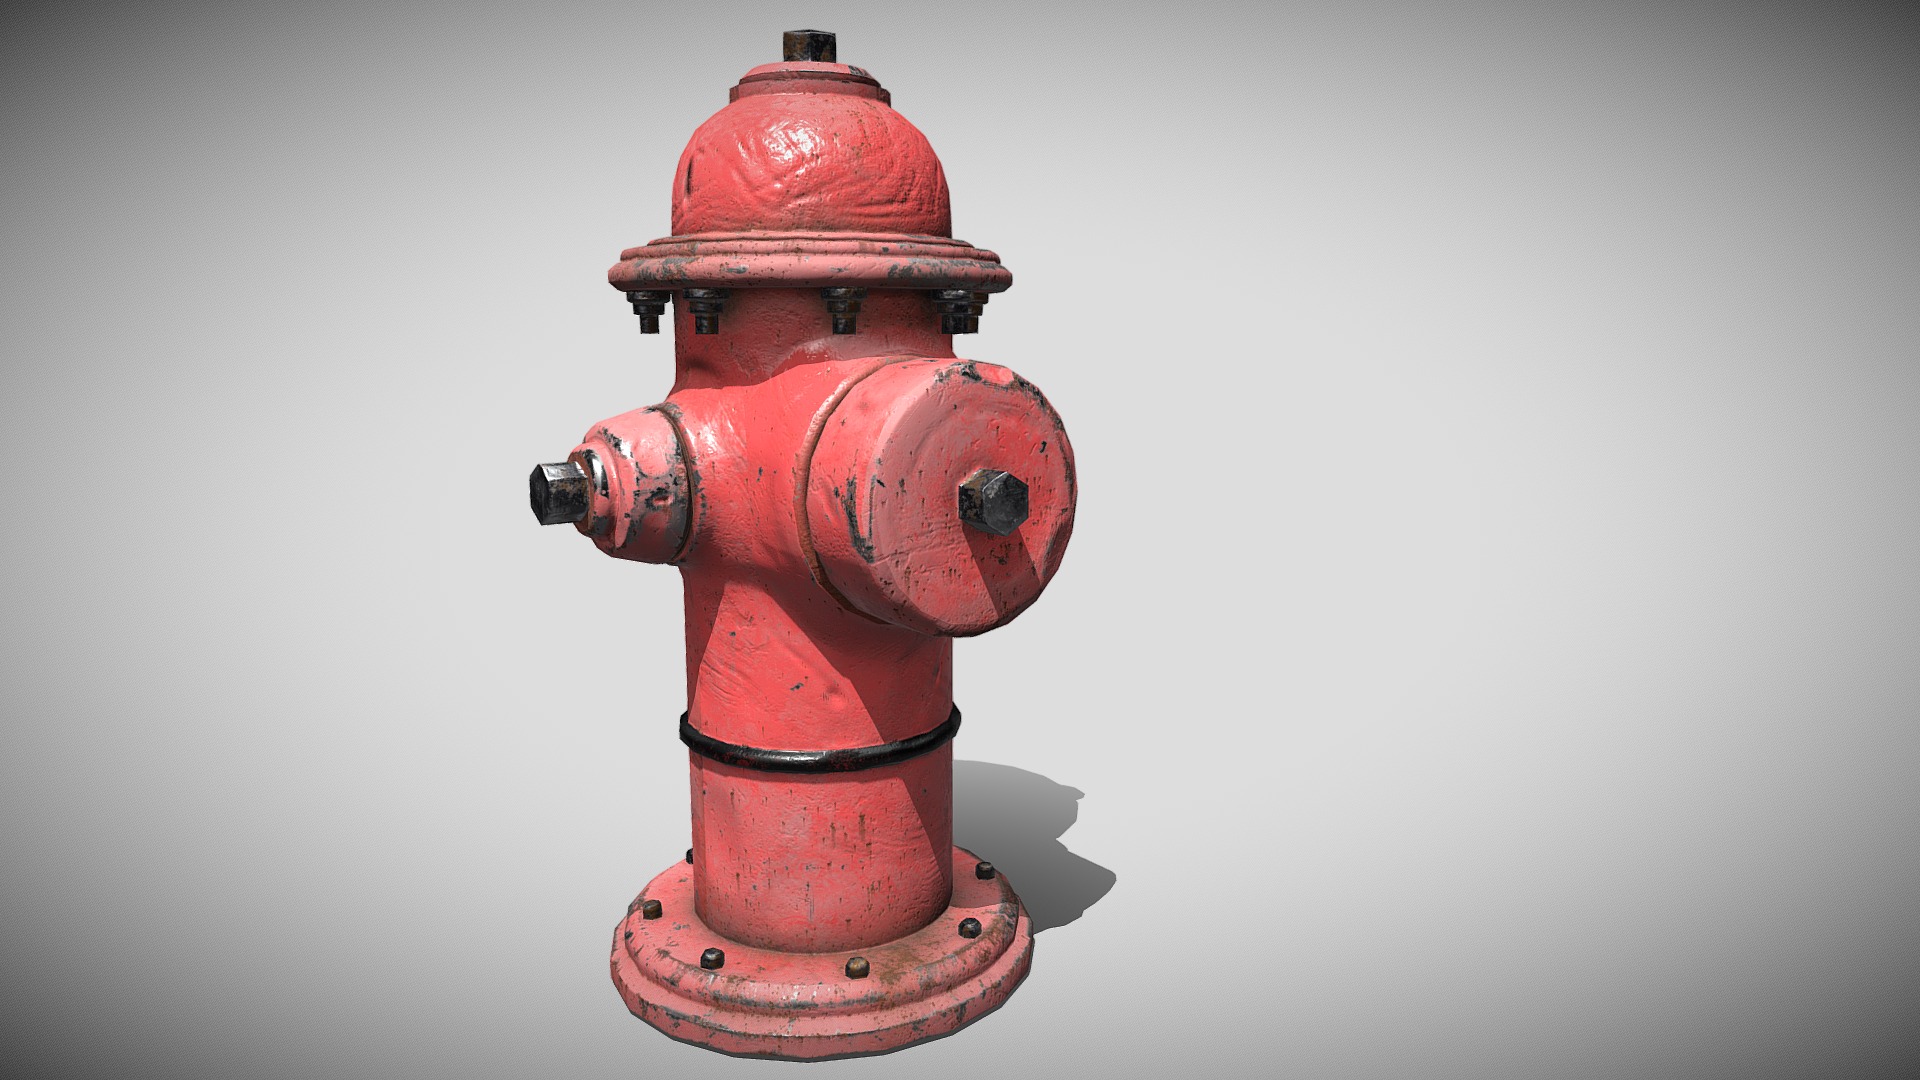 3D model Fire Hydrant - This is a 3D model of the Fire Hydrant. The 3D model is about a red fire hydrant.